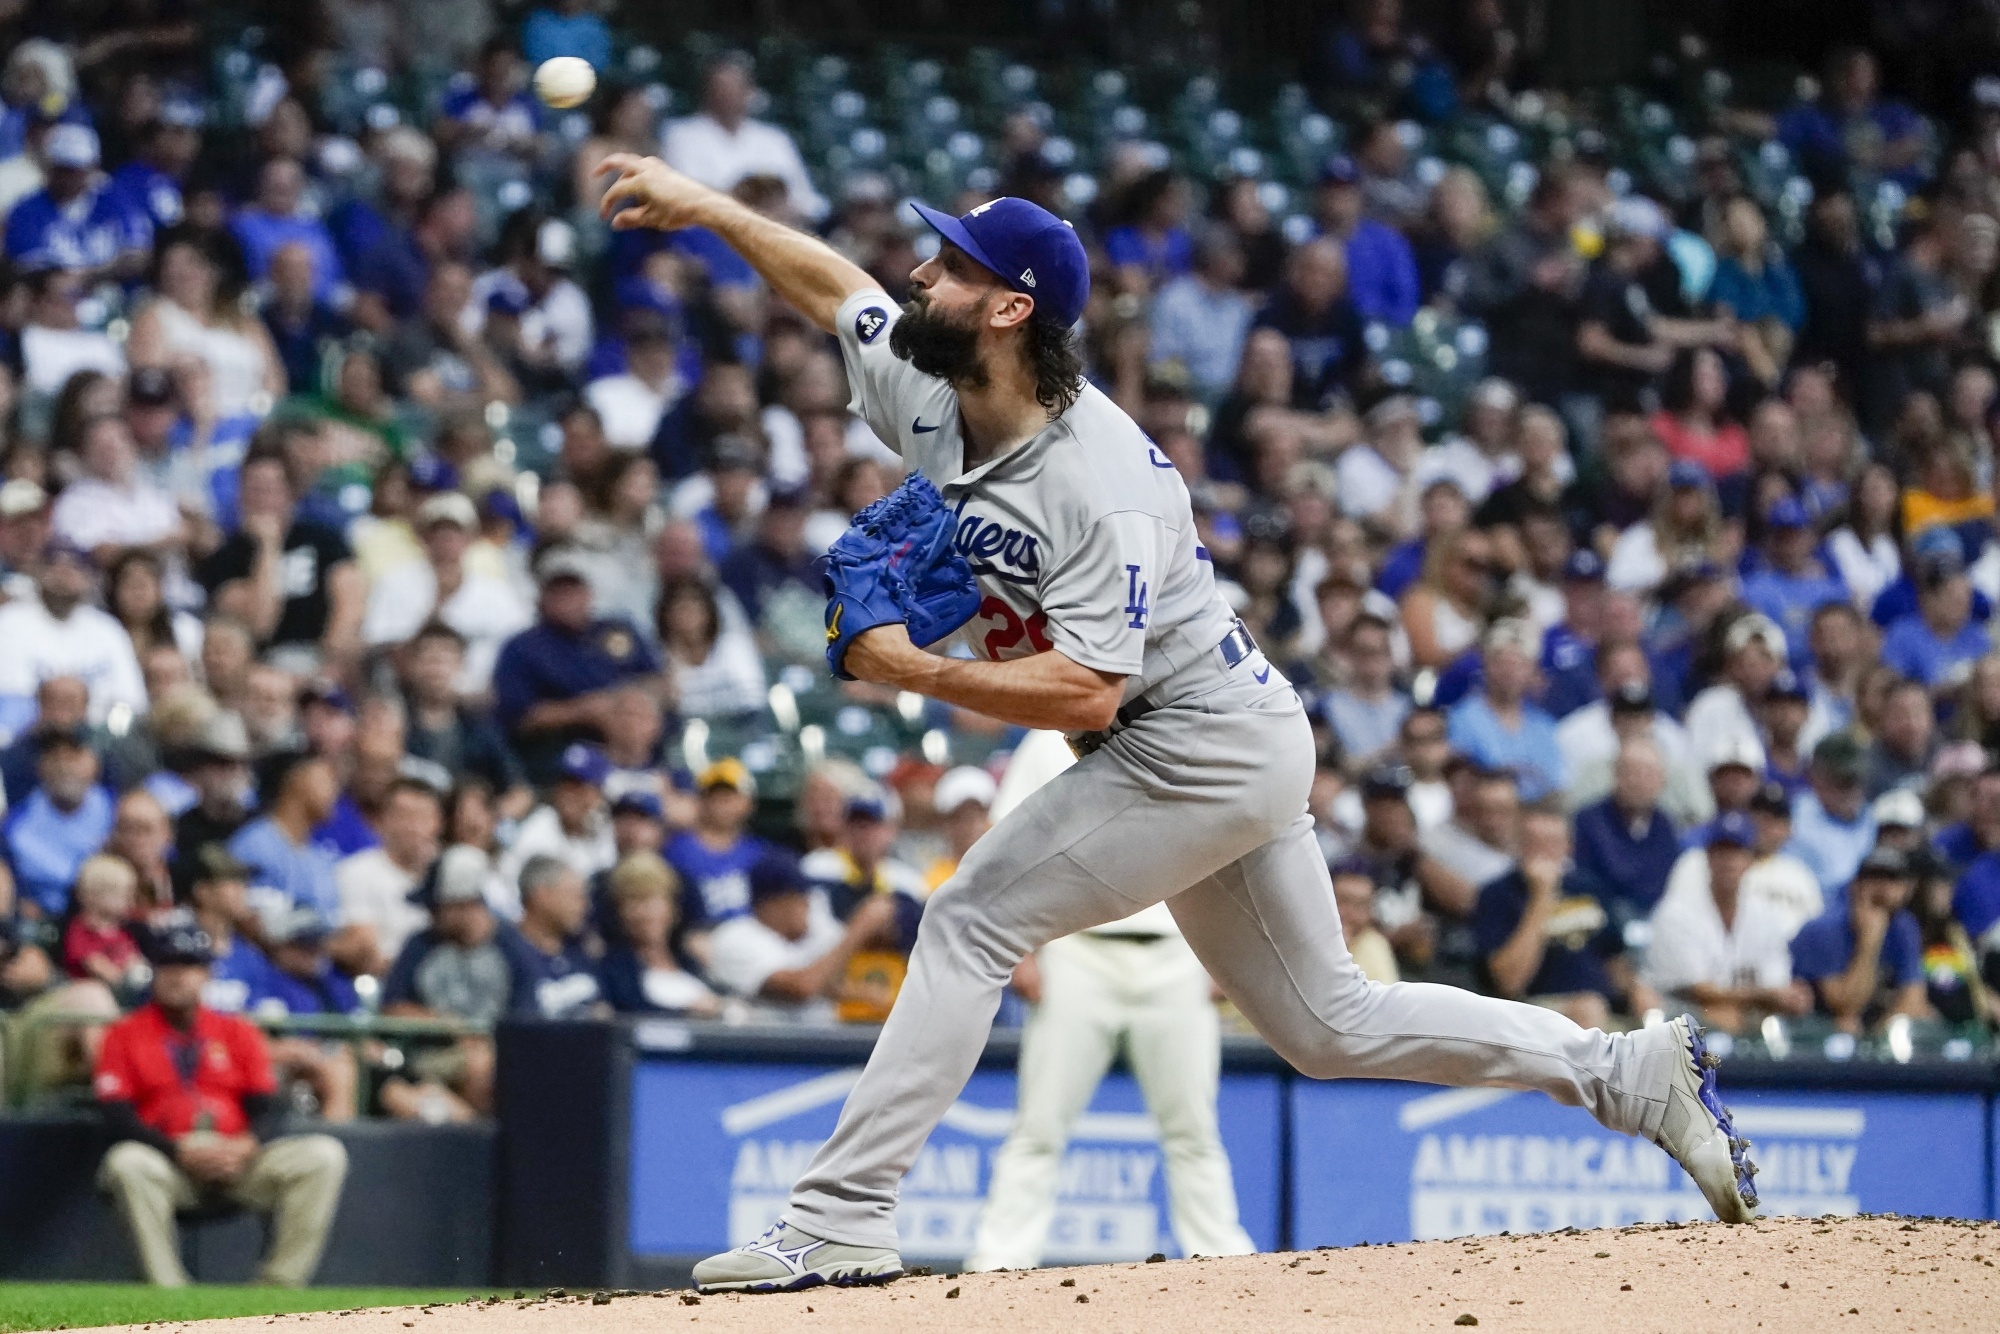 Rookie Pitcher Tony Gonsolin To Start Game 2 For Dodgers - CBS Los Angeles